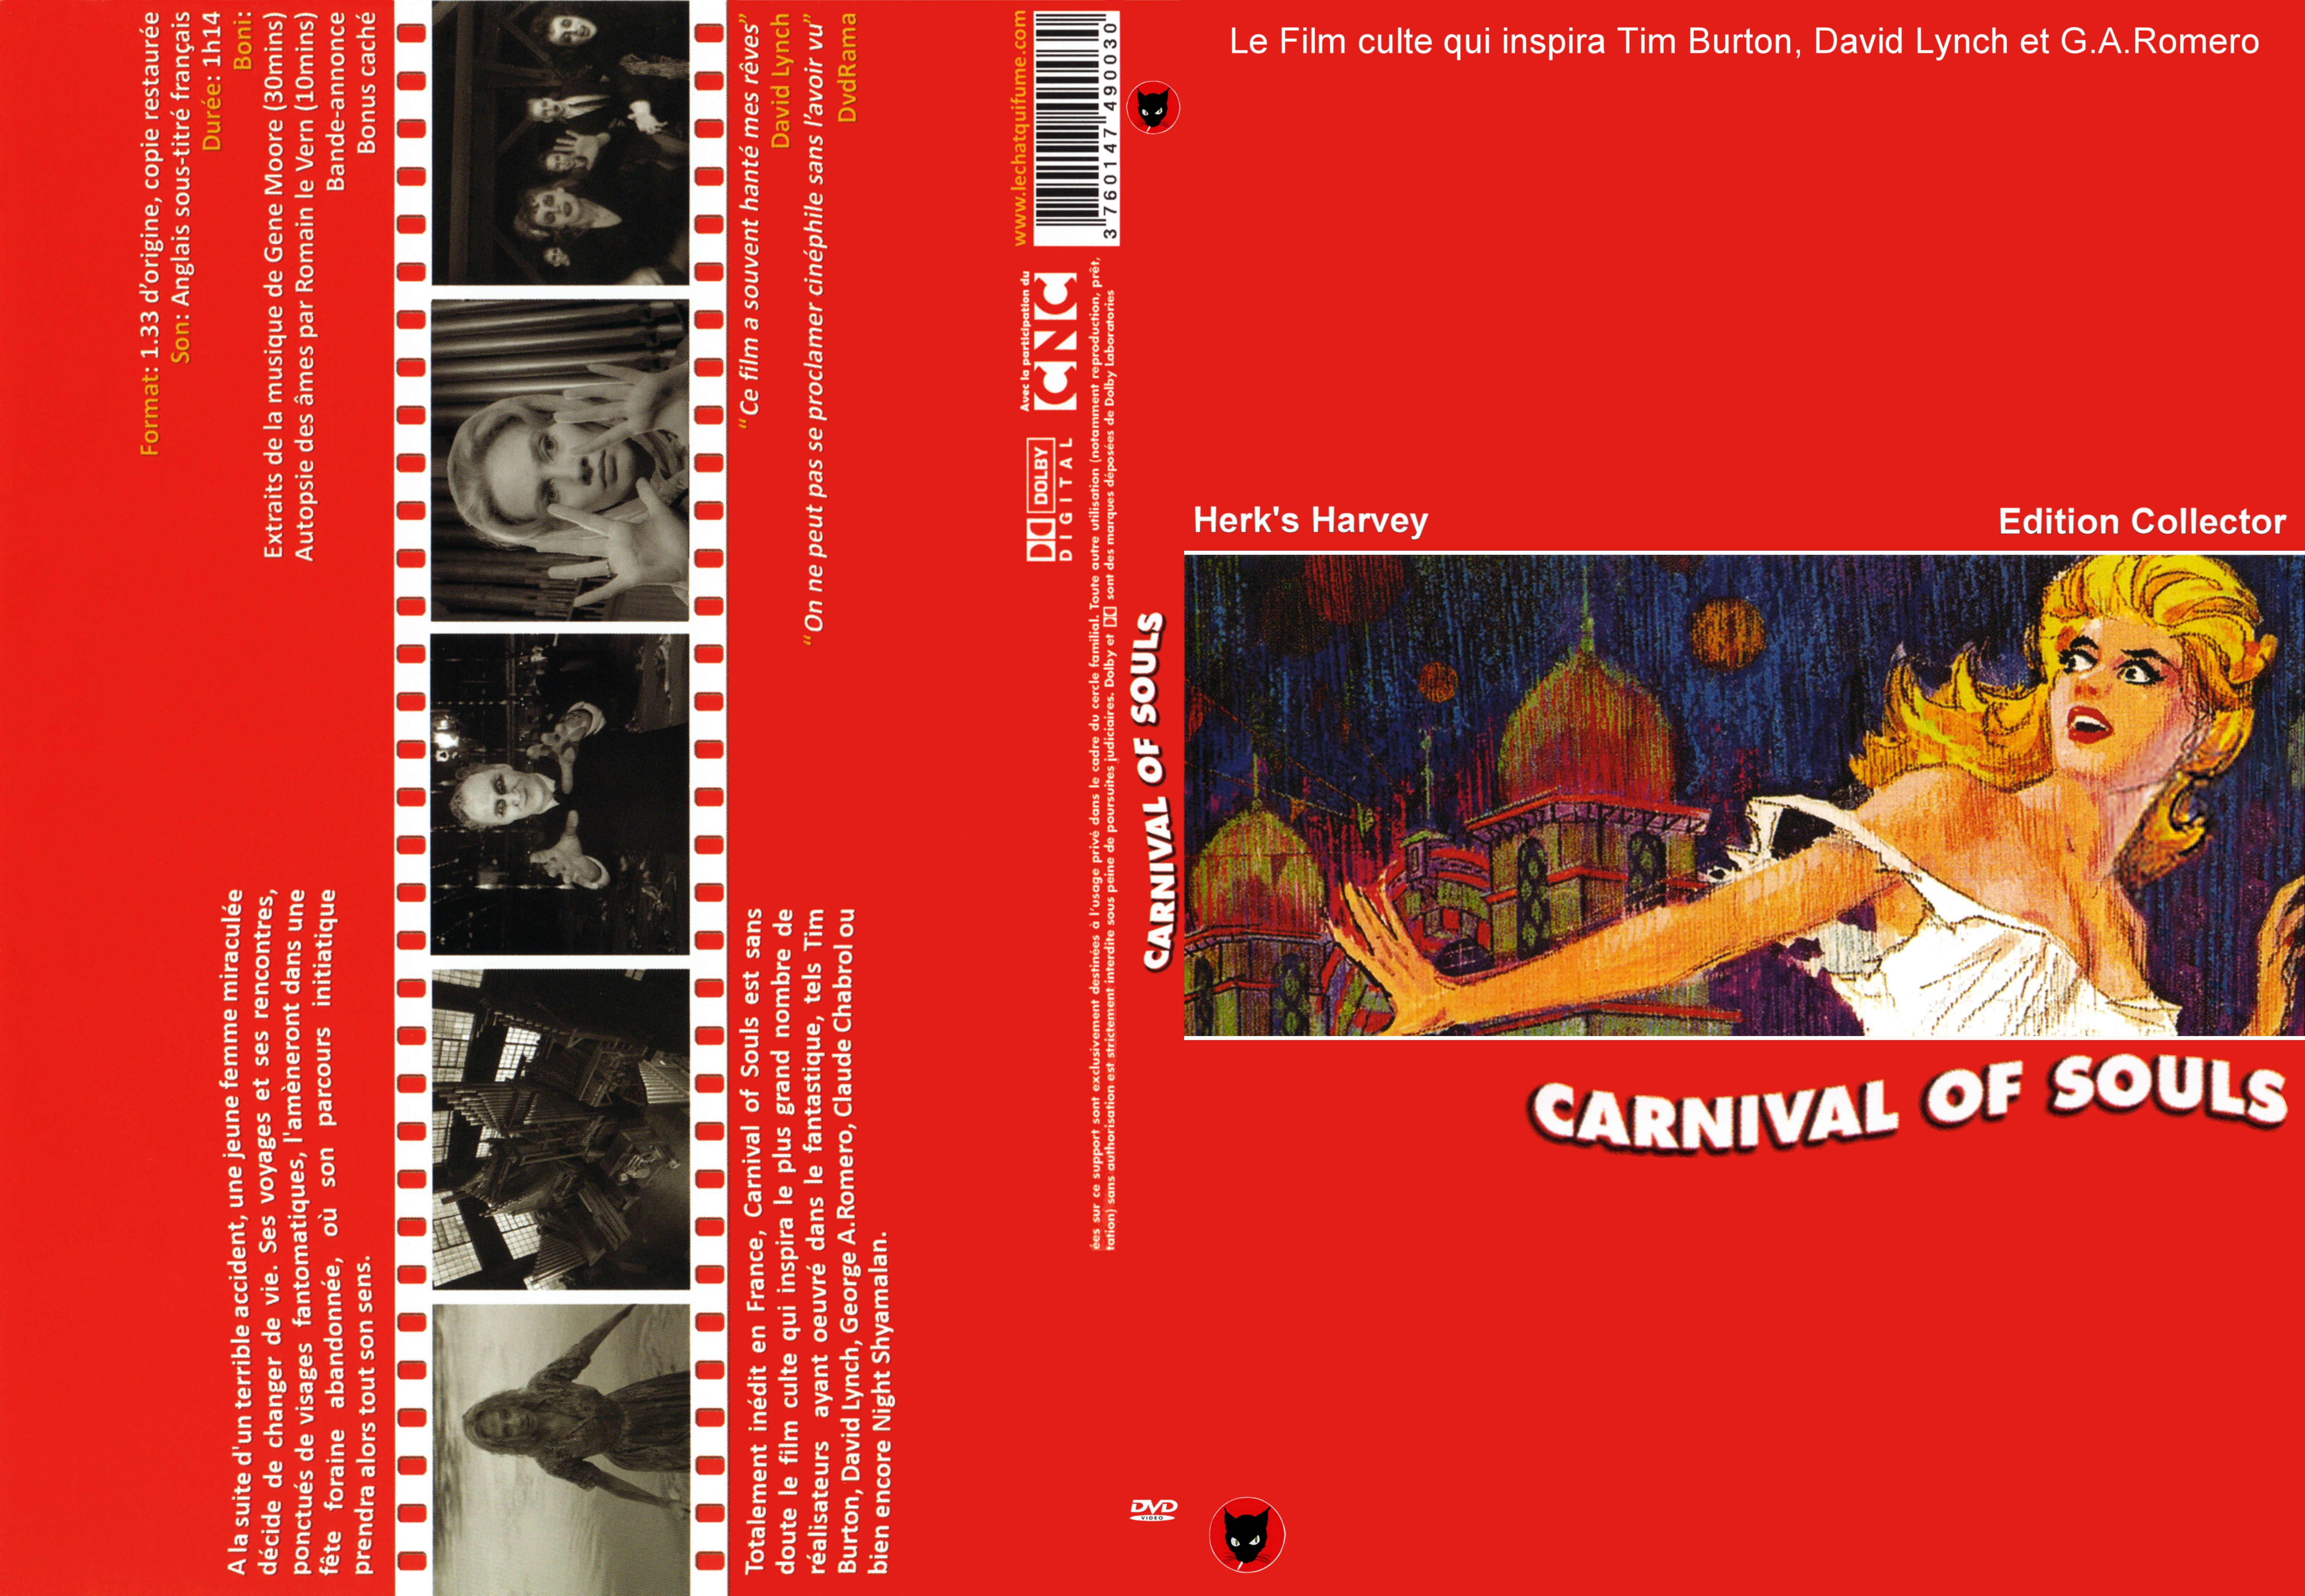 Jaquette DVD Carnival of souls